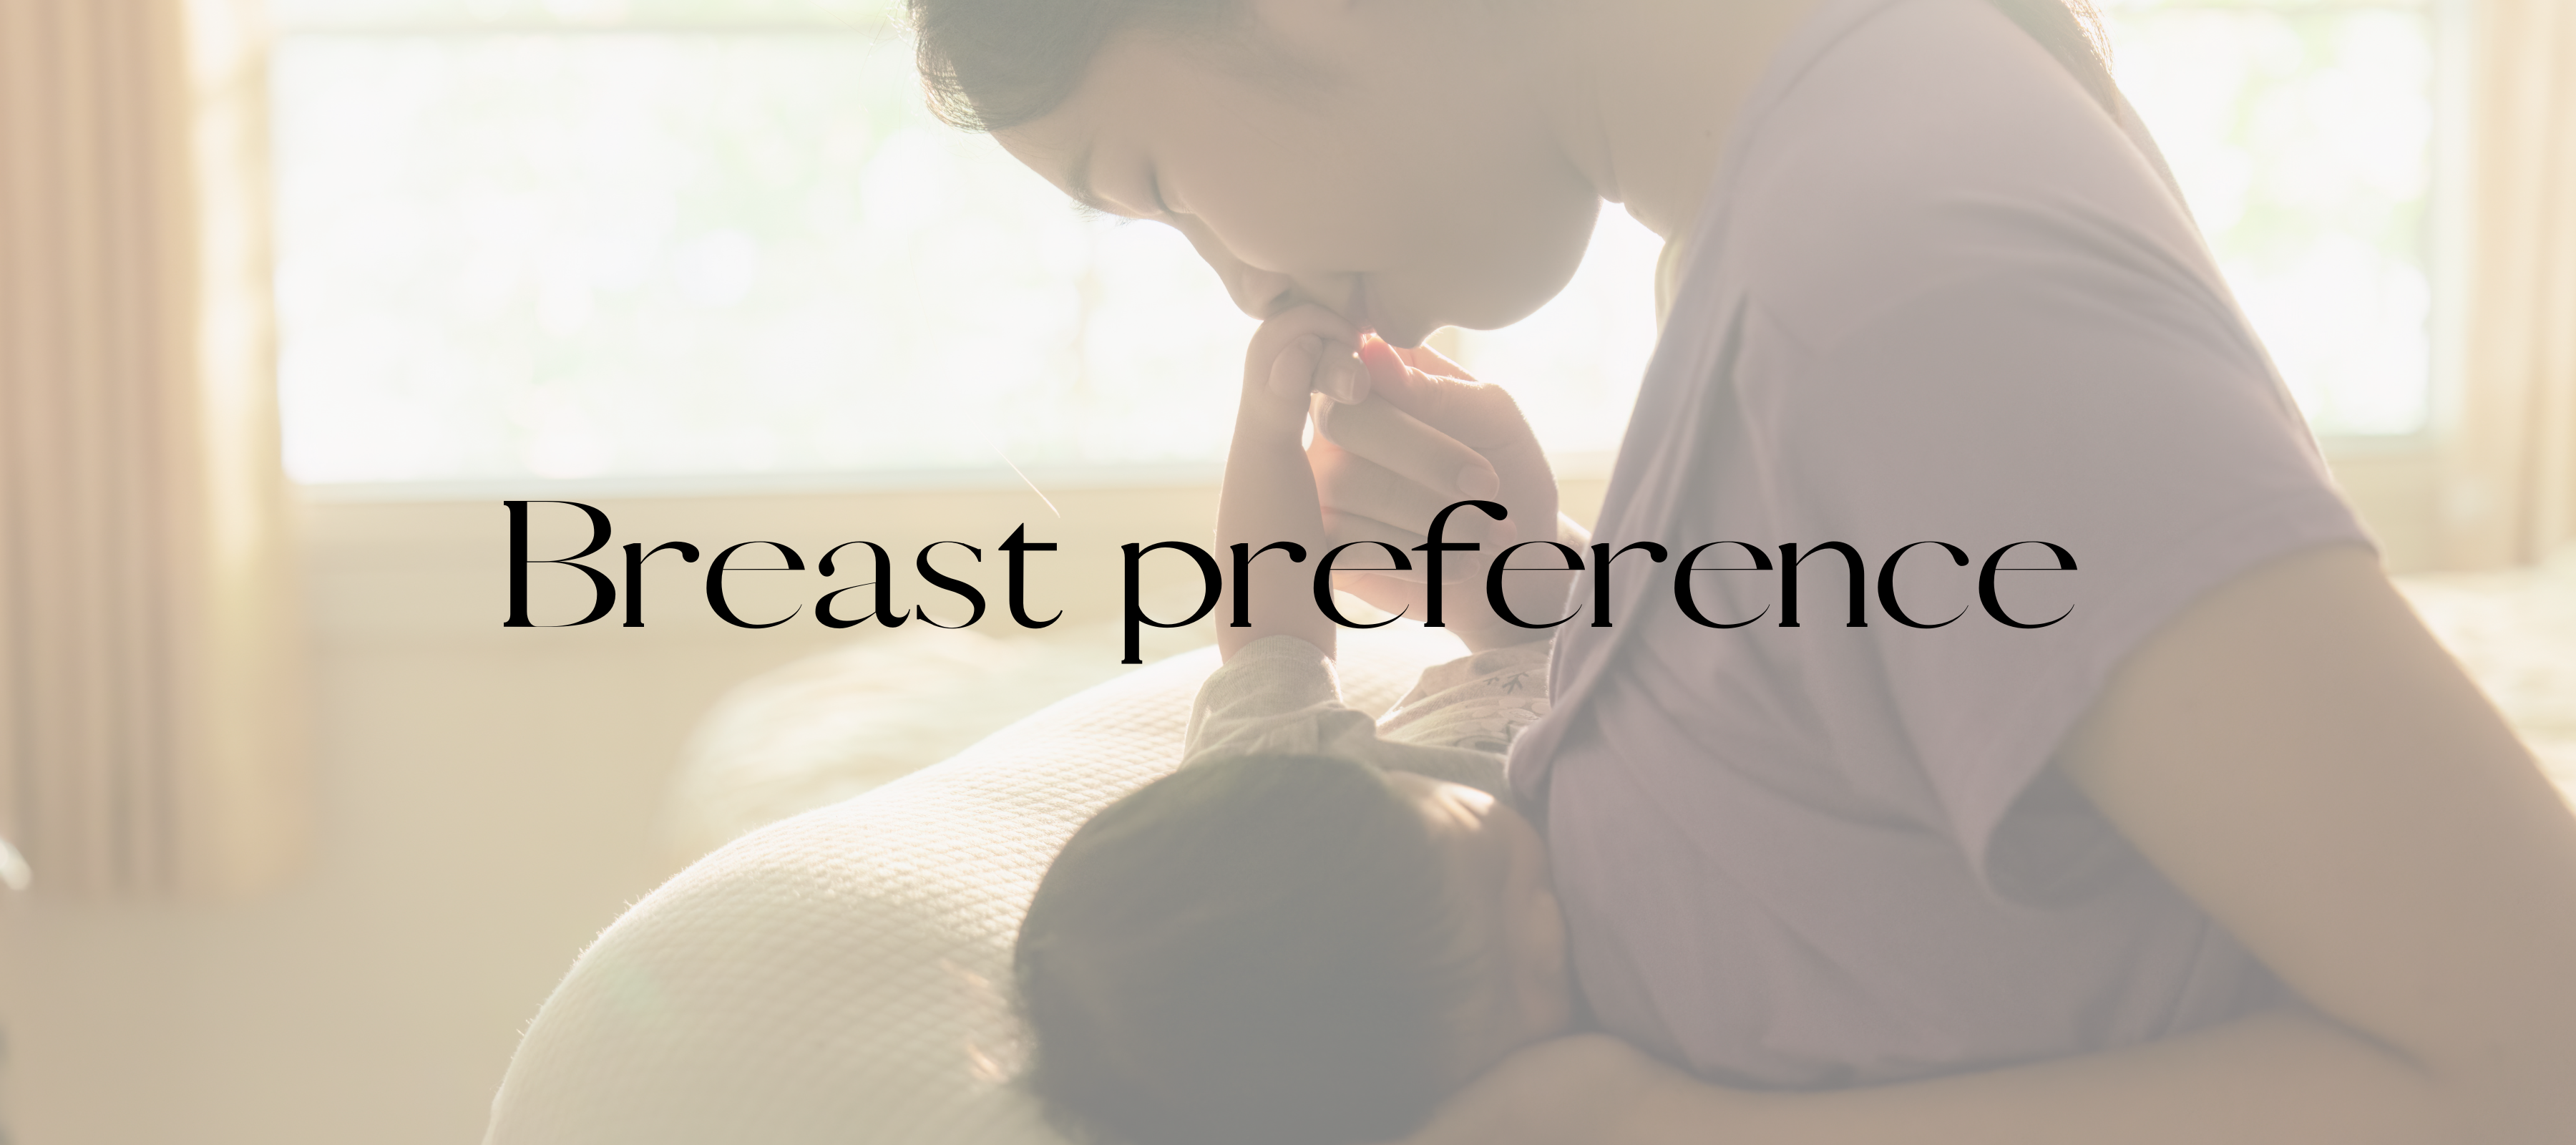 Breast preference